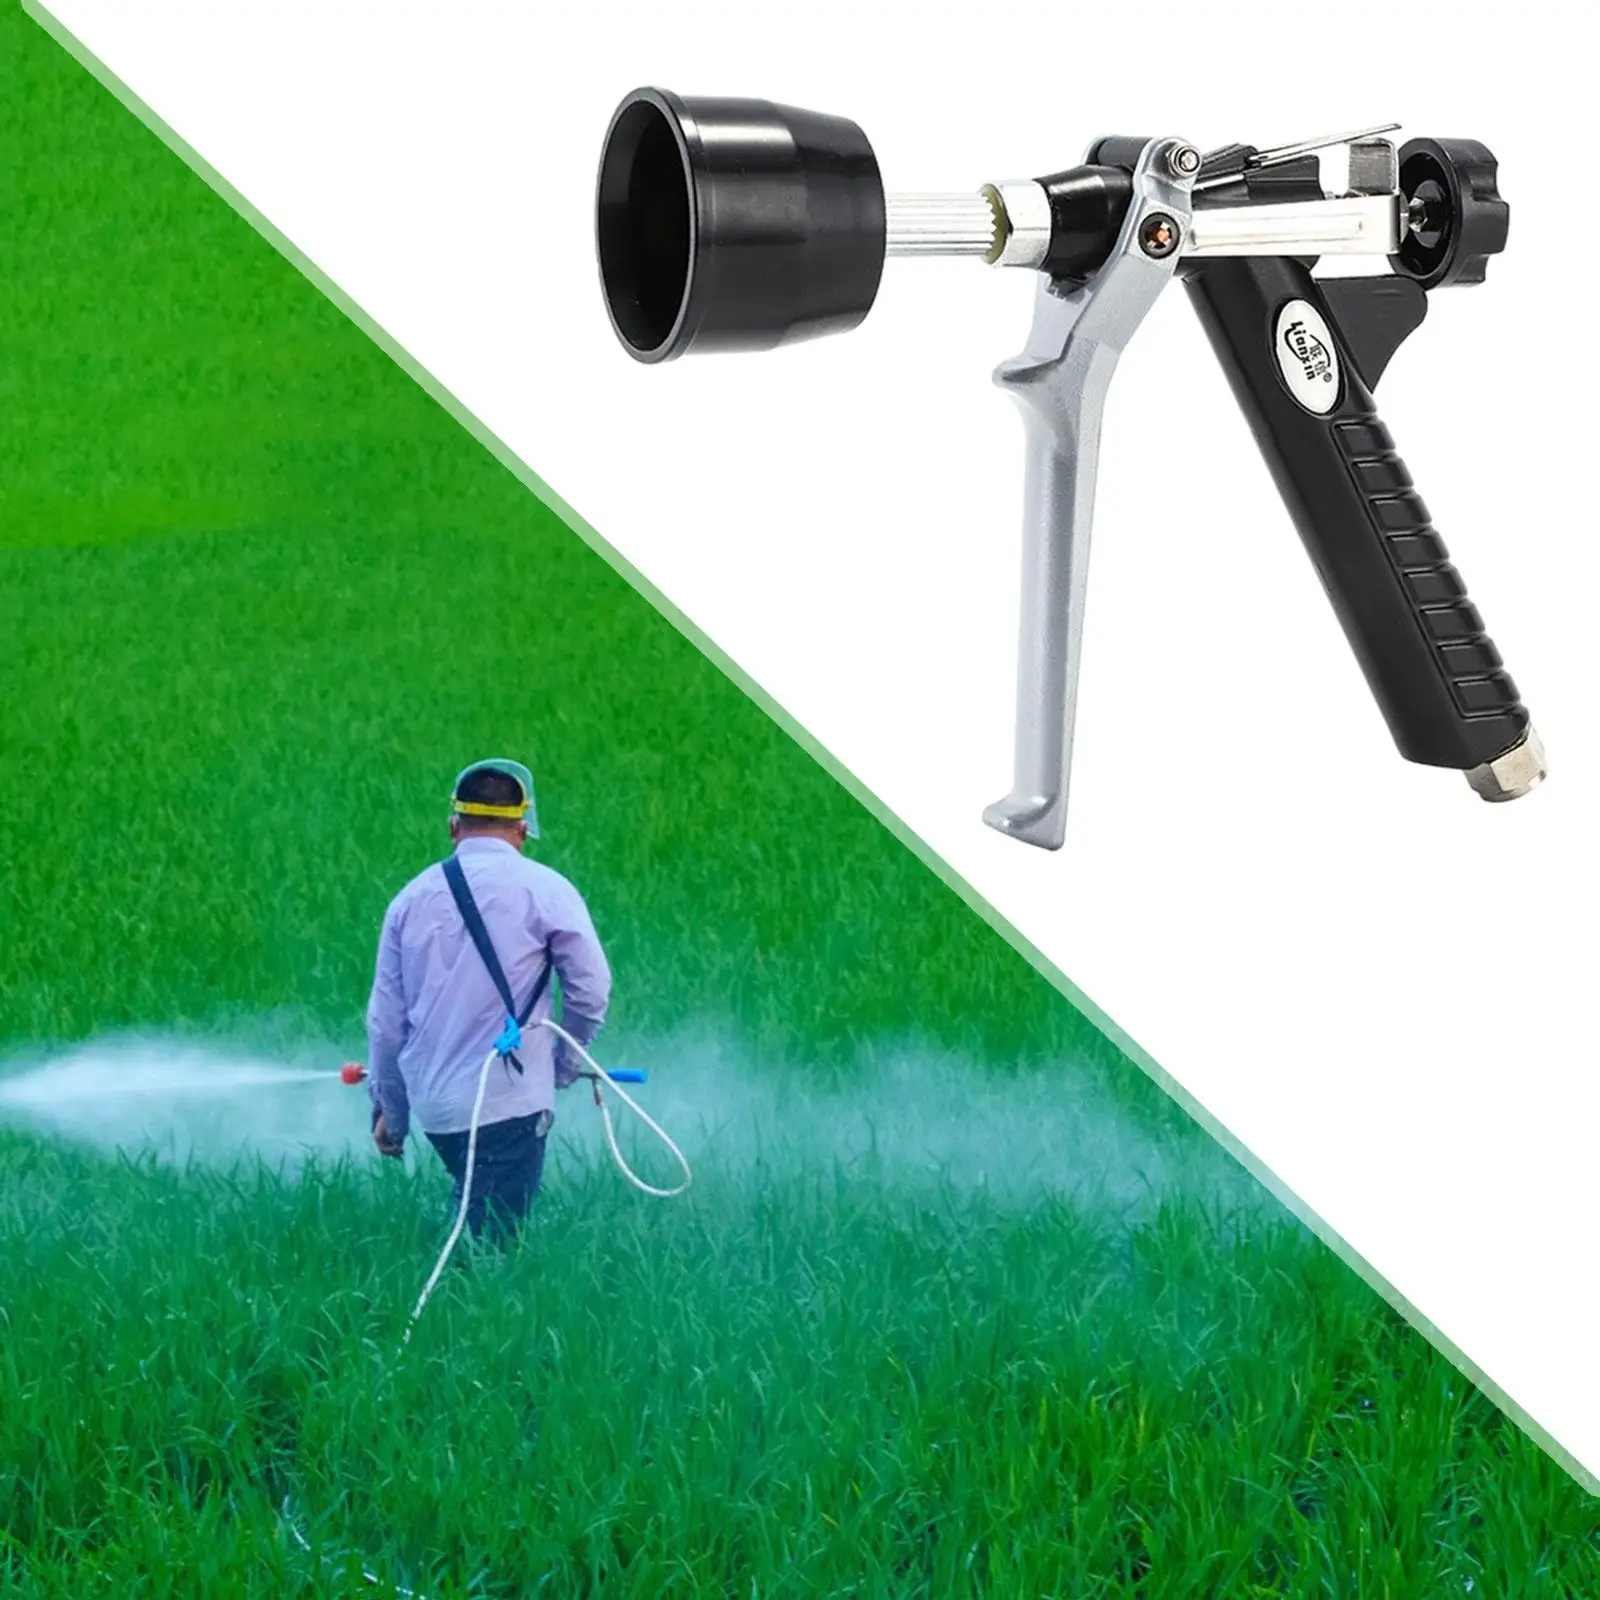 Agricultural Irrigation High Pressure Sprayer Nozzle Accessory for Lawn Yard